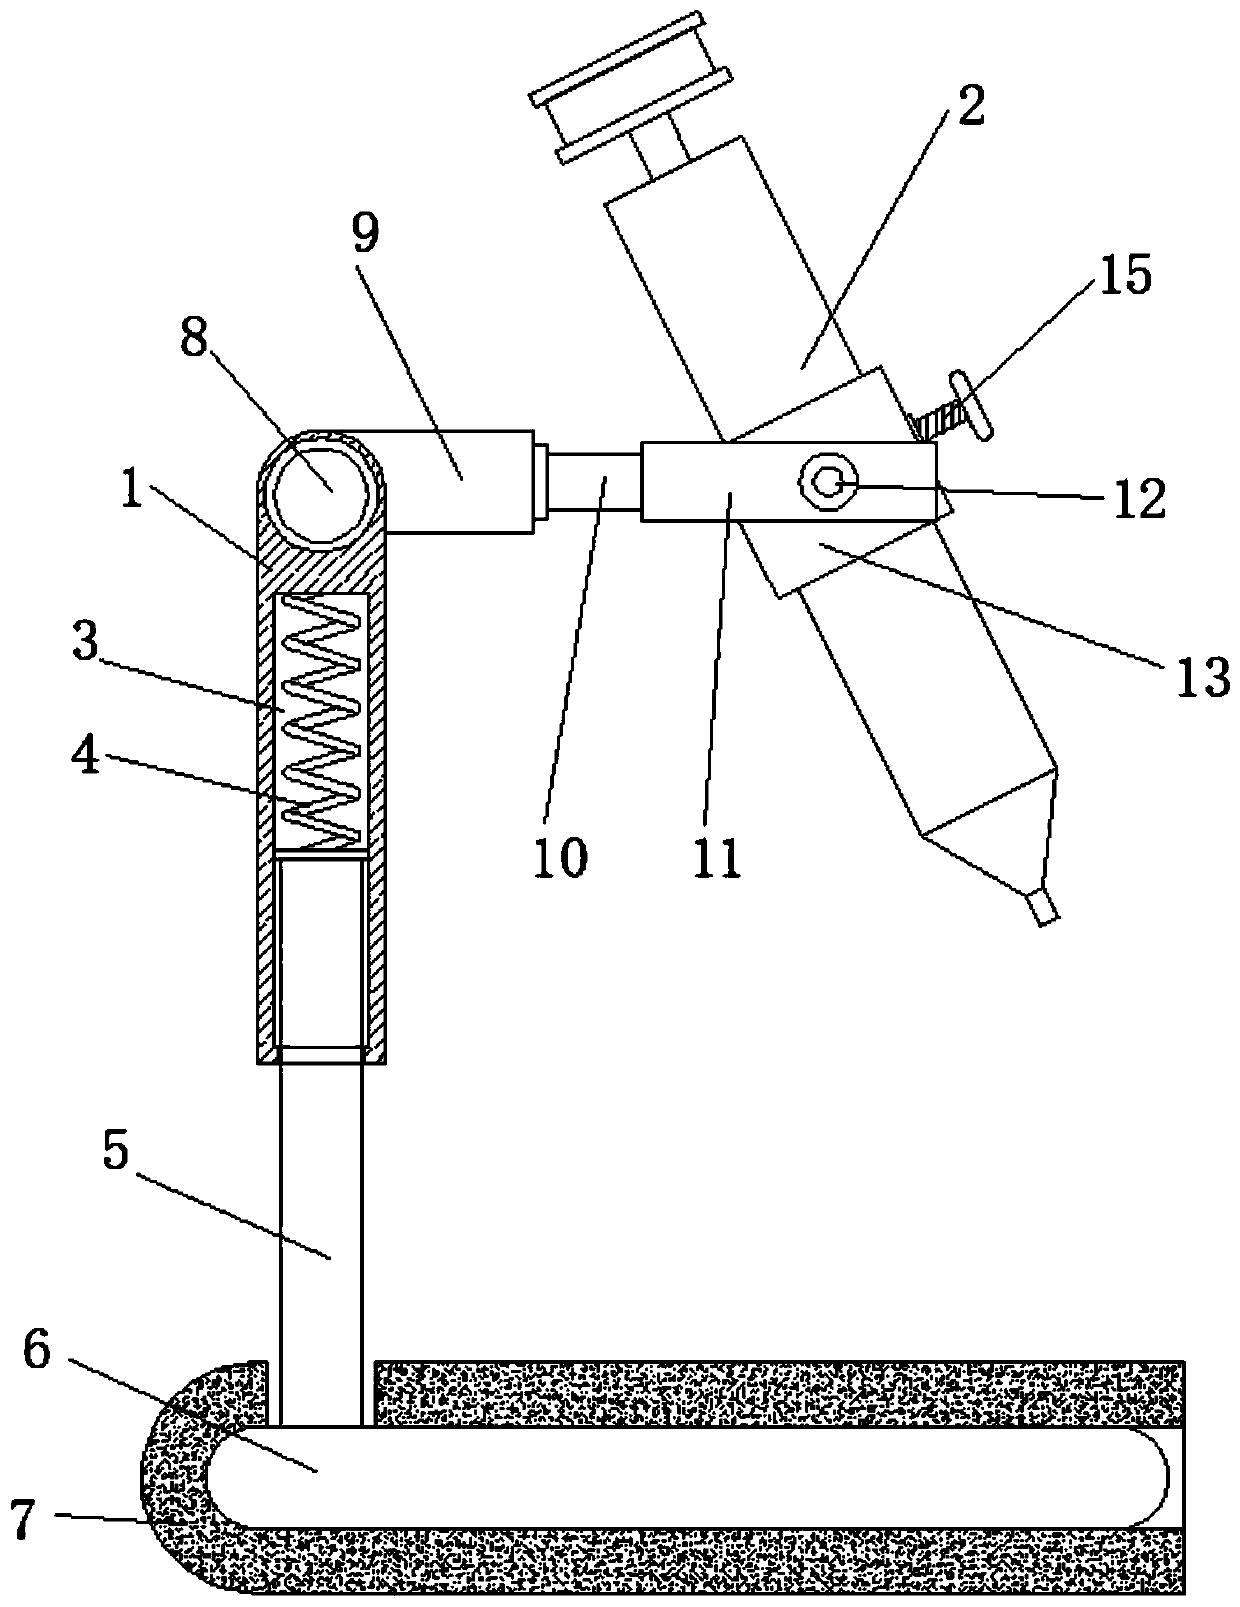 Portable flushing device for bleeding wound care